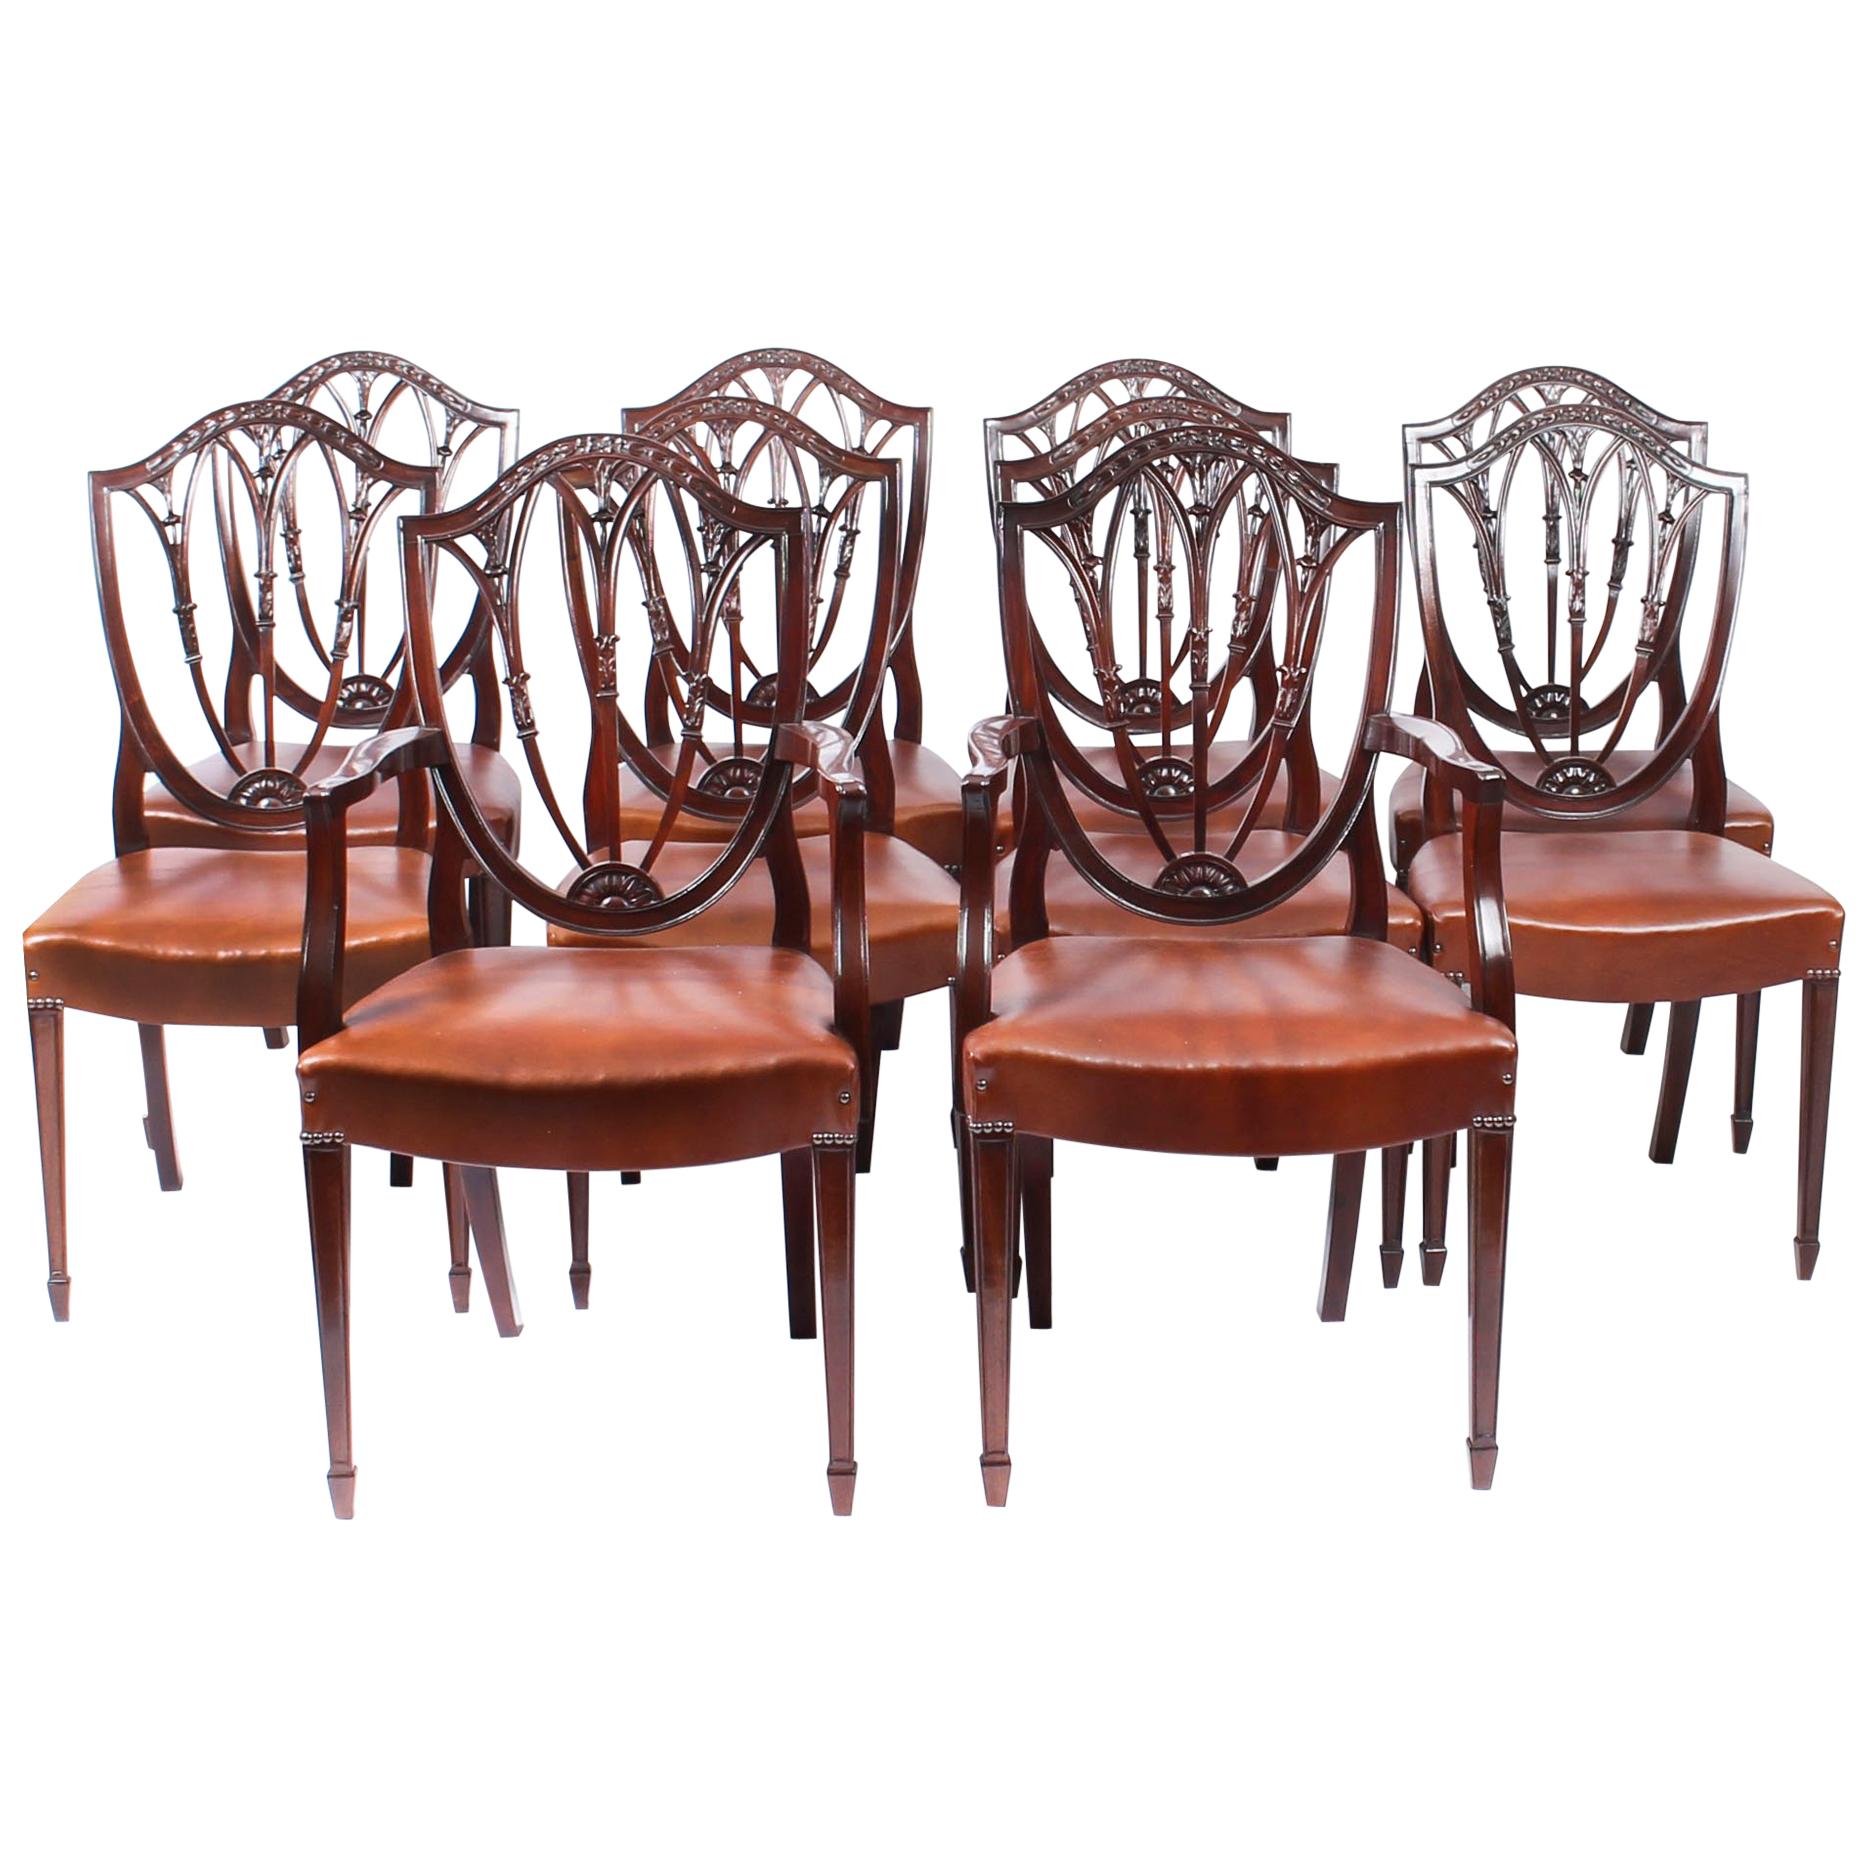 Antique Set of 10 English Hepplewhite Shield Back Dining Chairs 19th Century